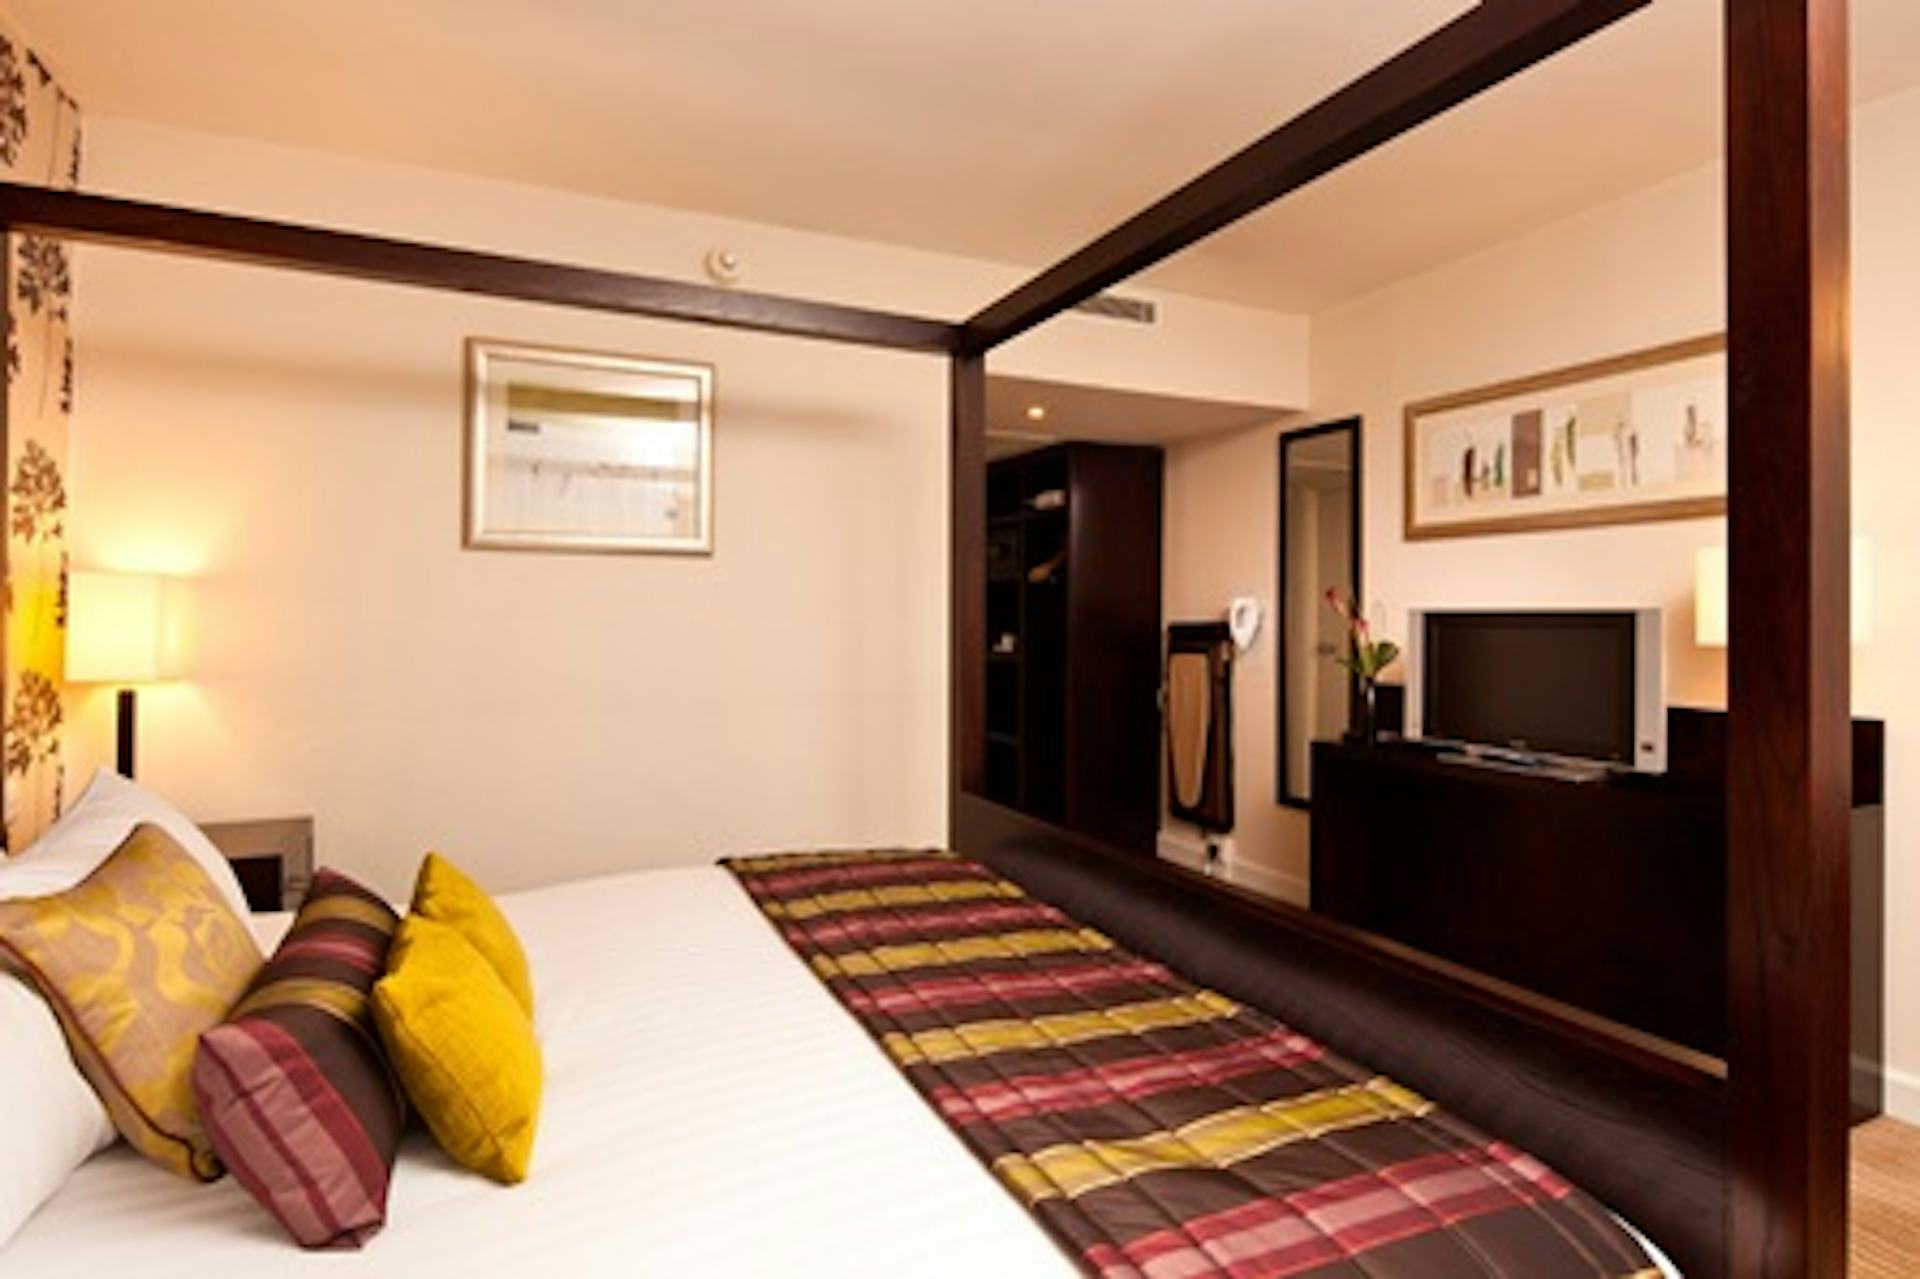 One Night Break for Two at the Mercure Manchester Piccadilly Hotel